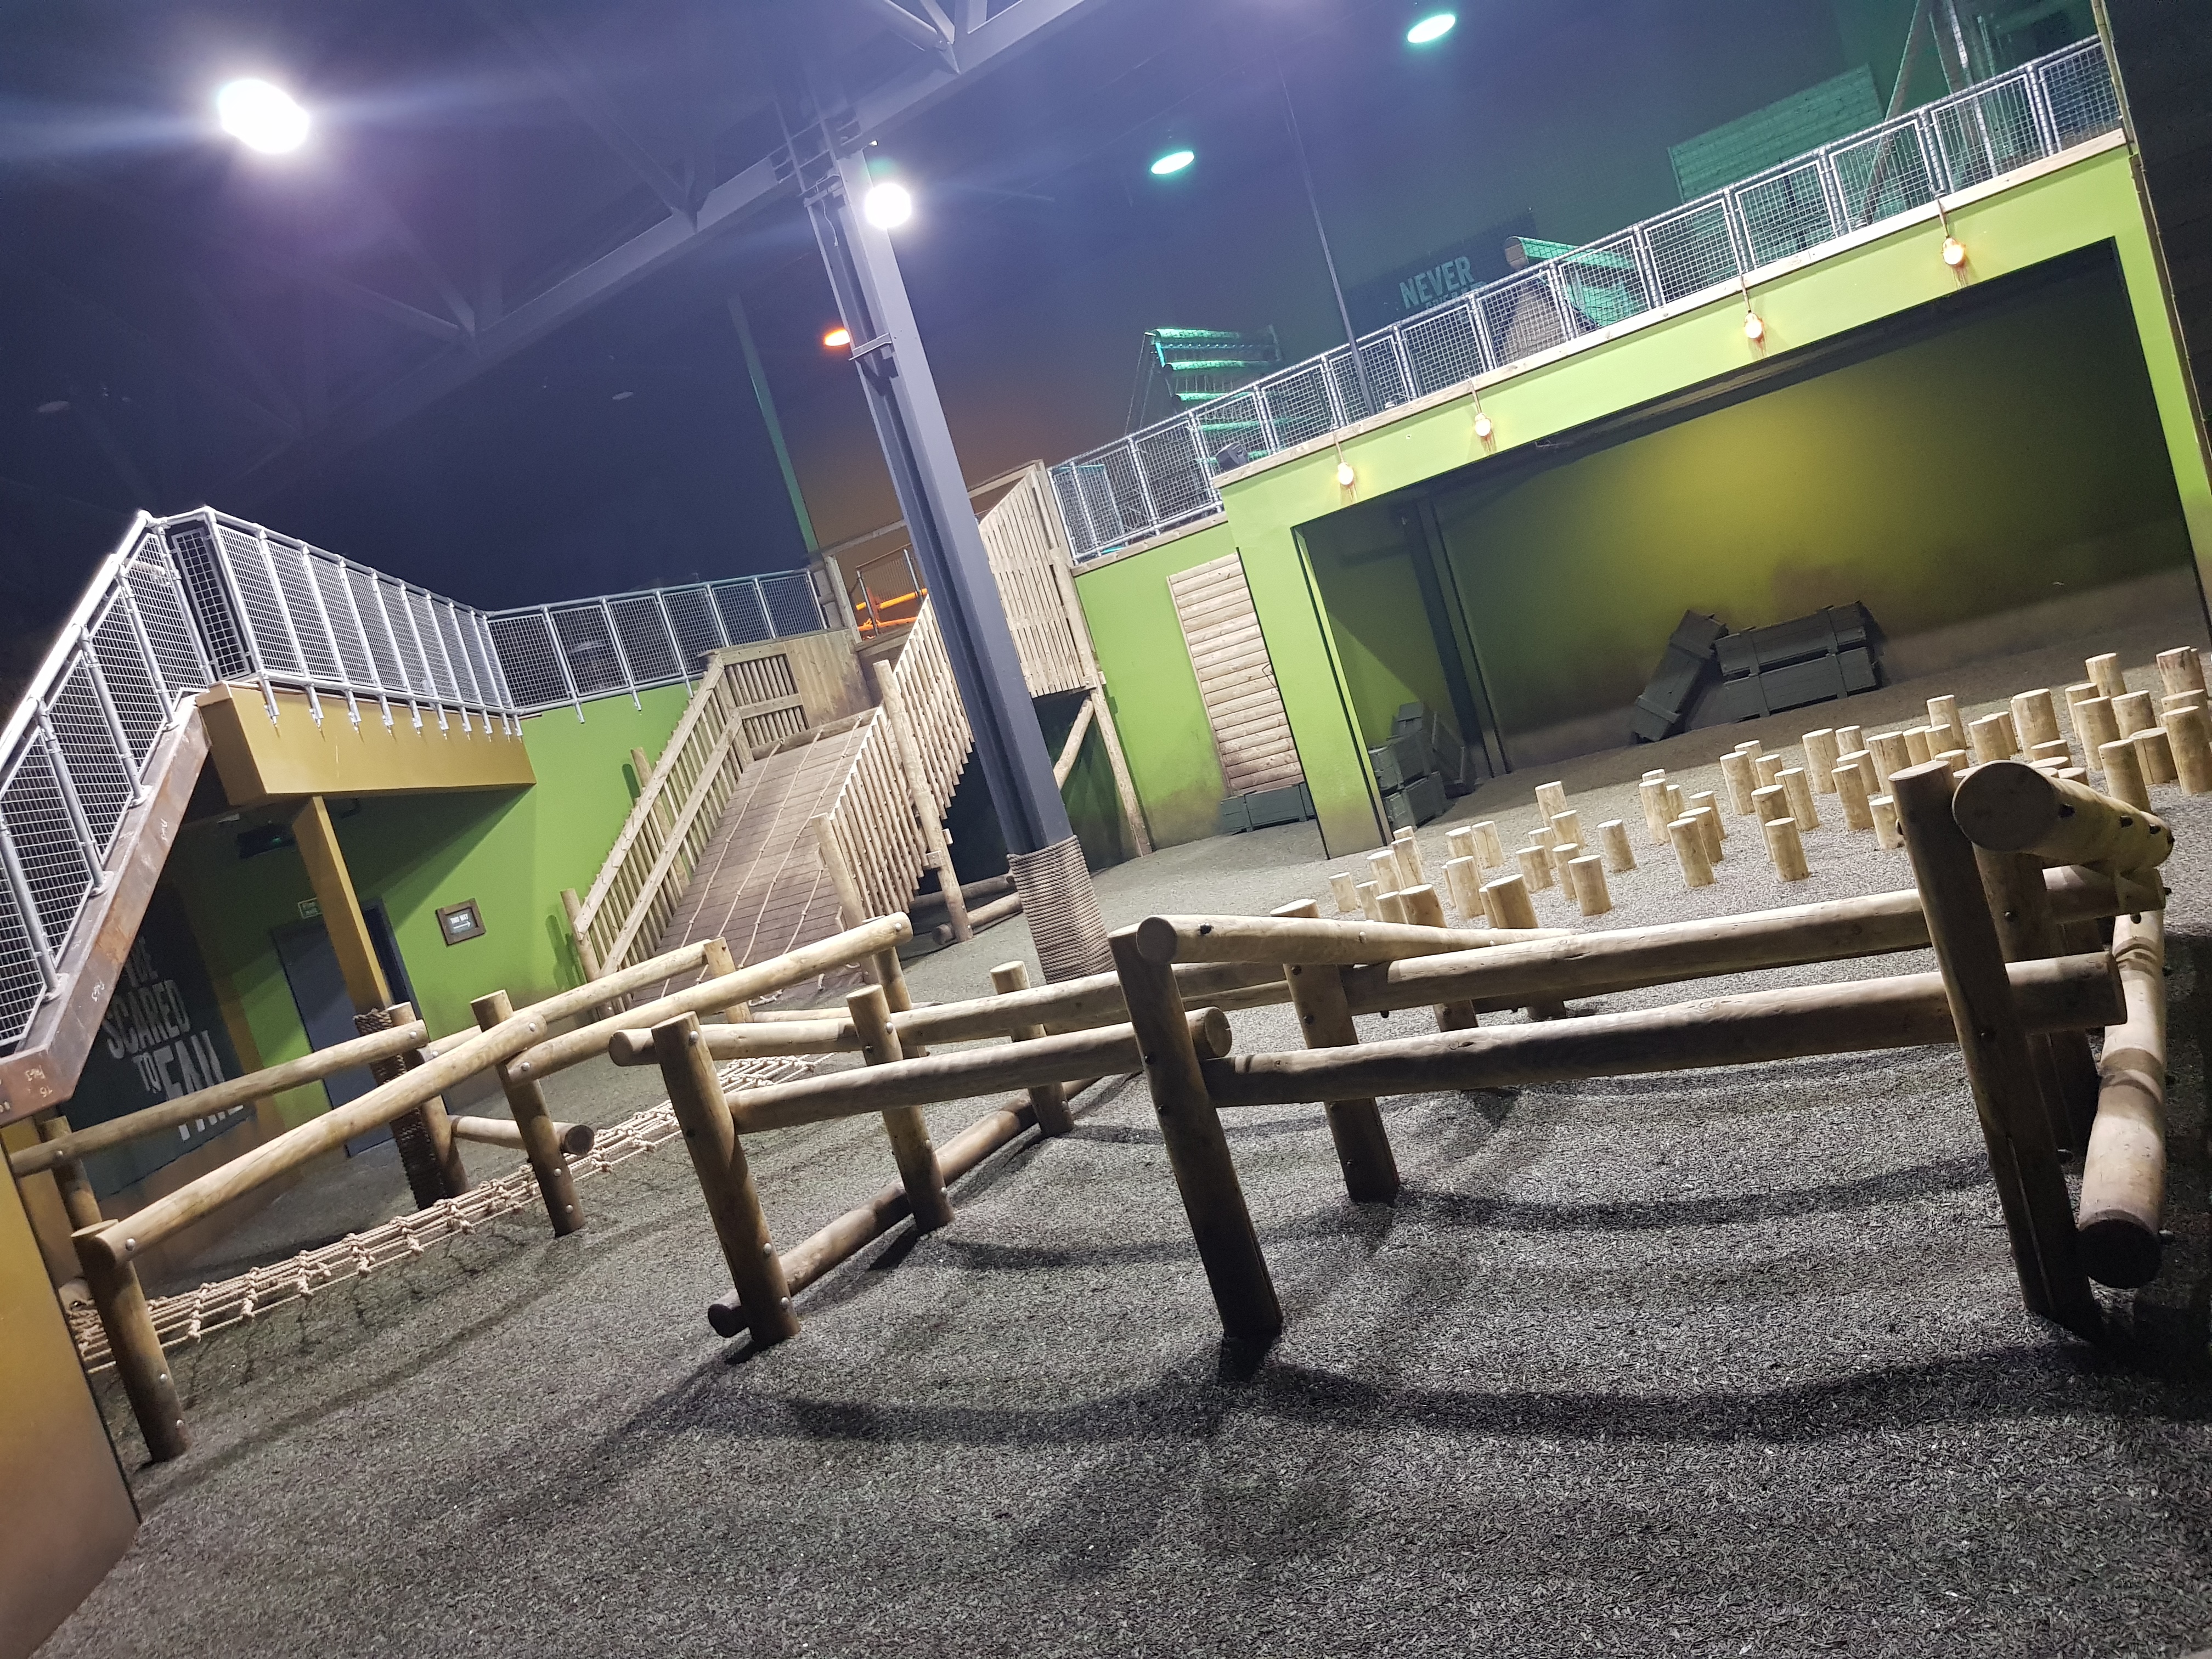 The Assault course at the Bear Grylls Adventure, Birmingham. Wooden stepping stones, poles for going under and over, a net to crawl under and a steep slope to climb up.